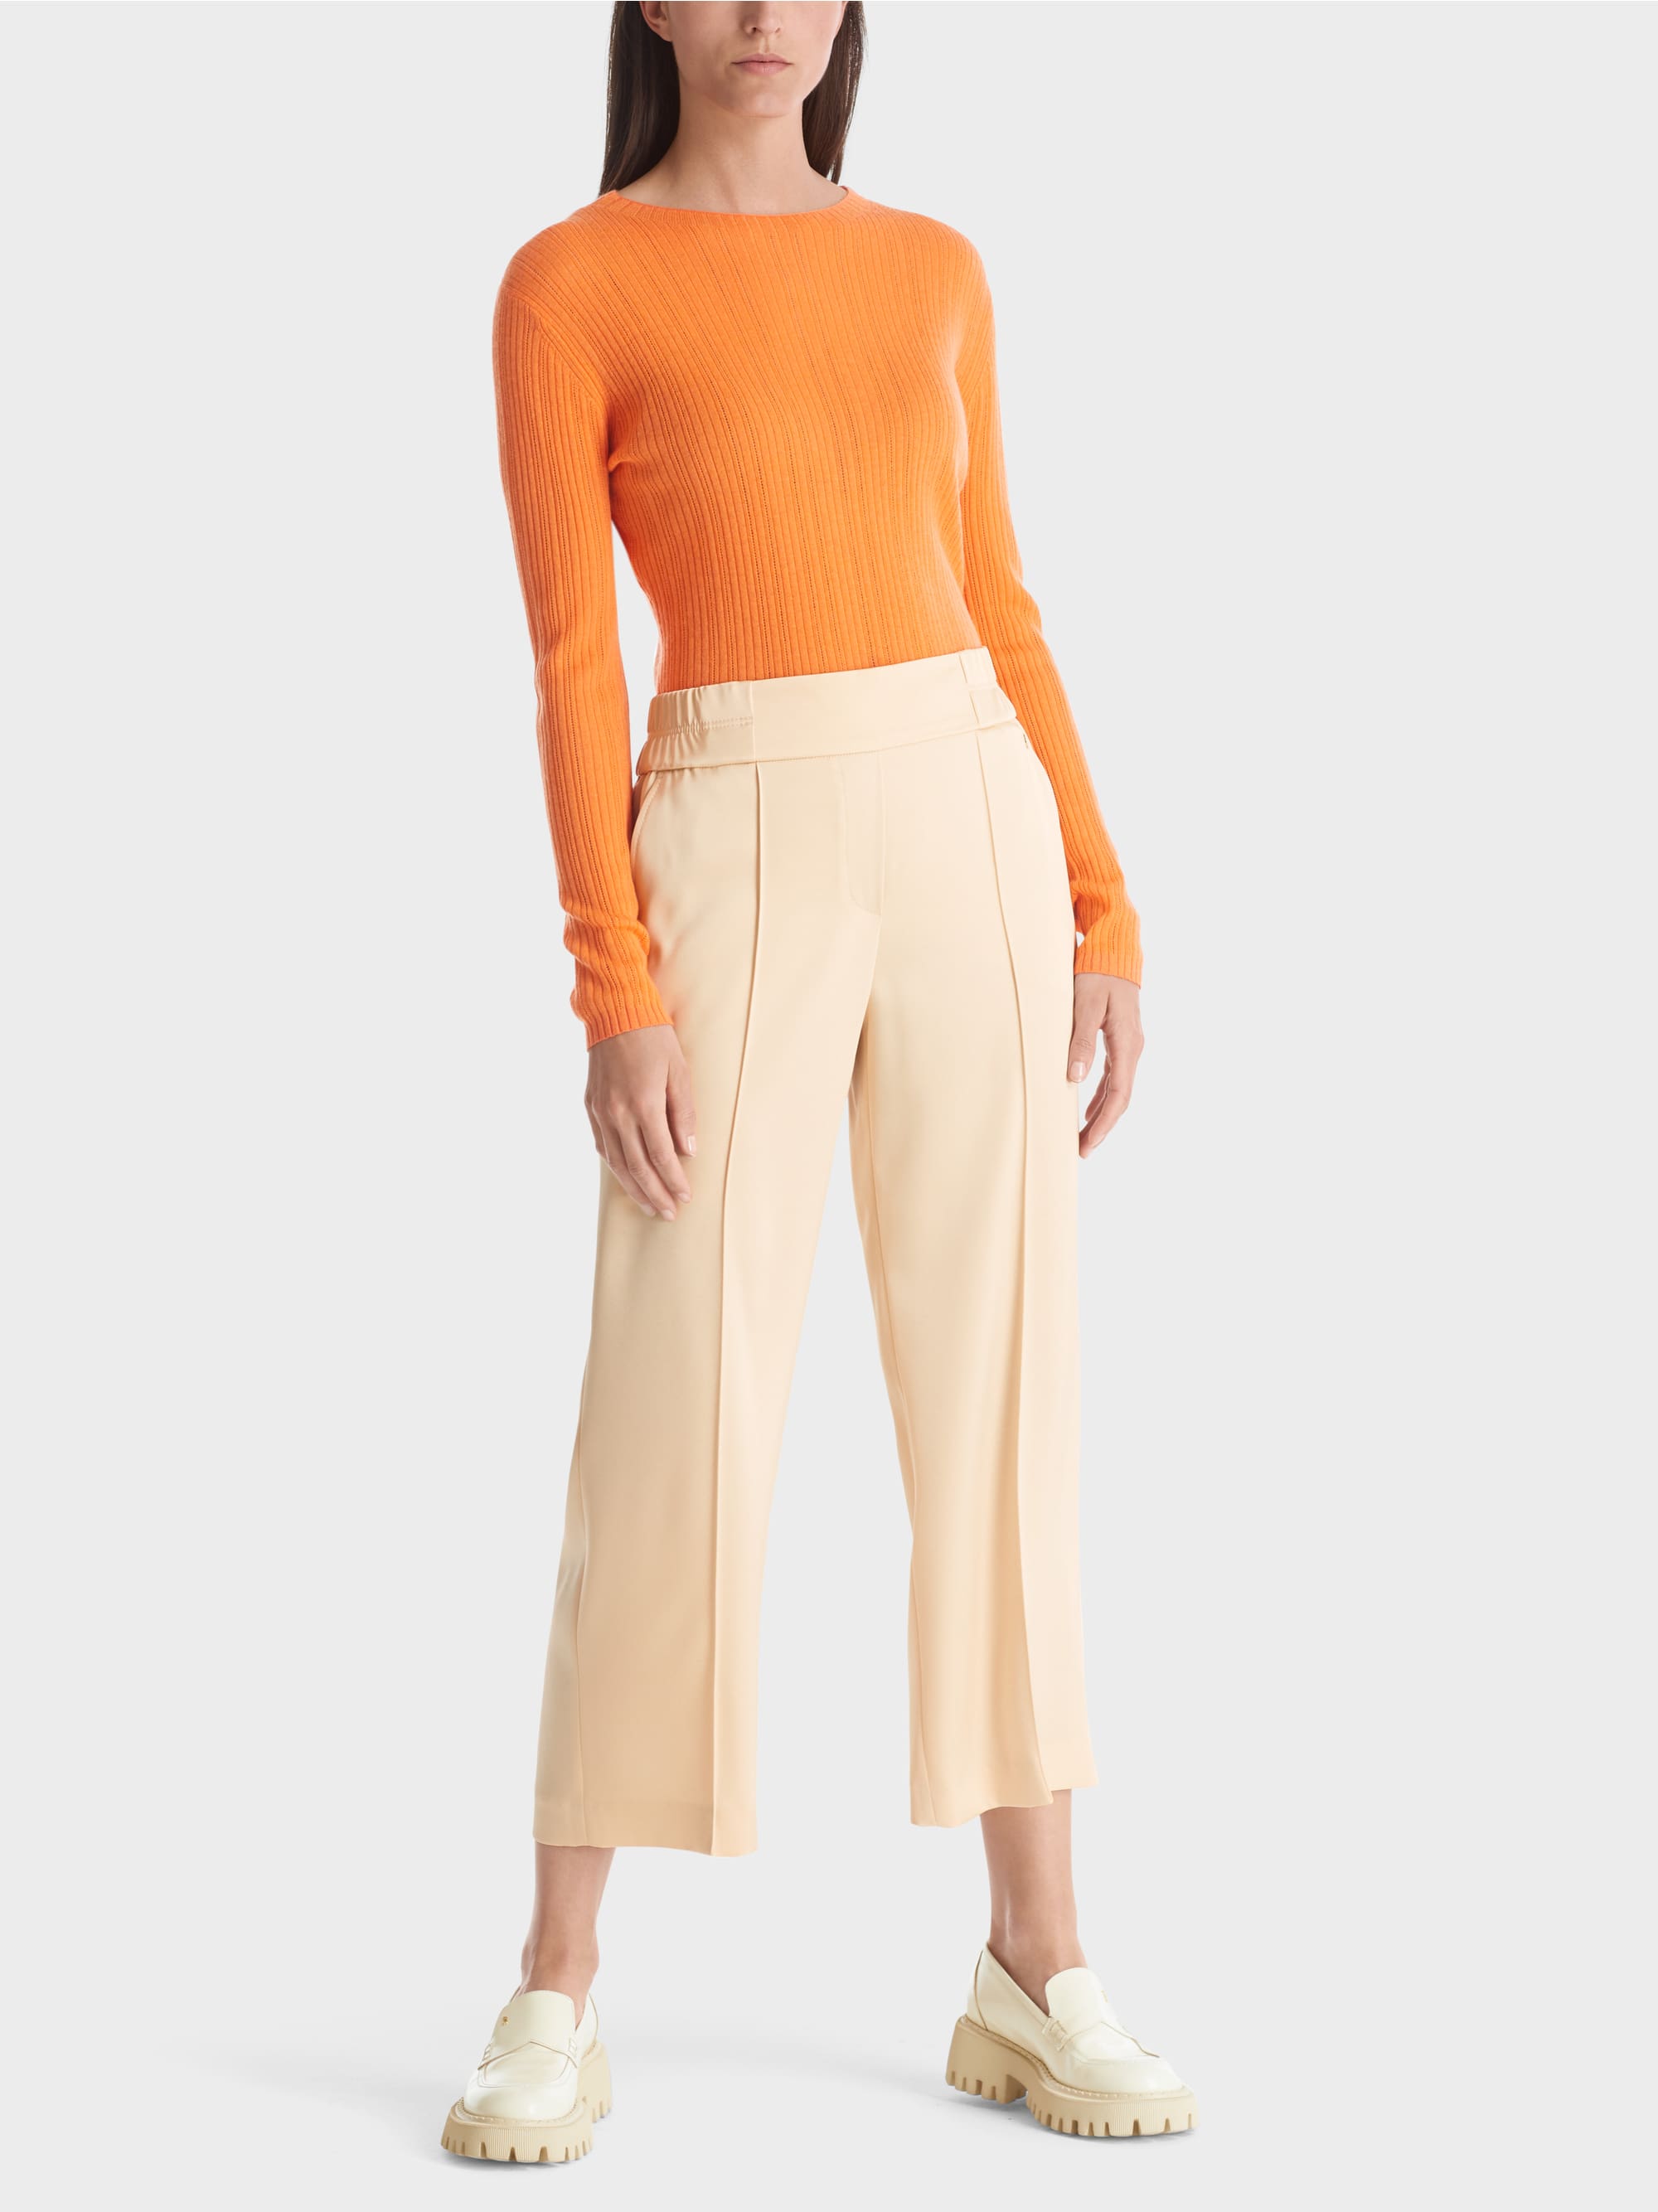 MACBEES MARCCAIN CREAM CROPPED SATIN TROUSERS VC8125W18 223